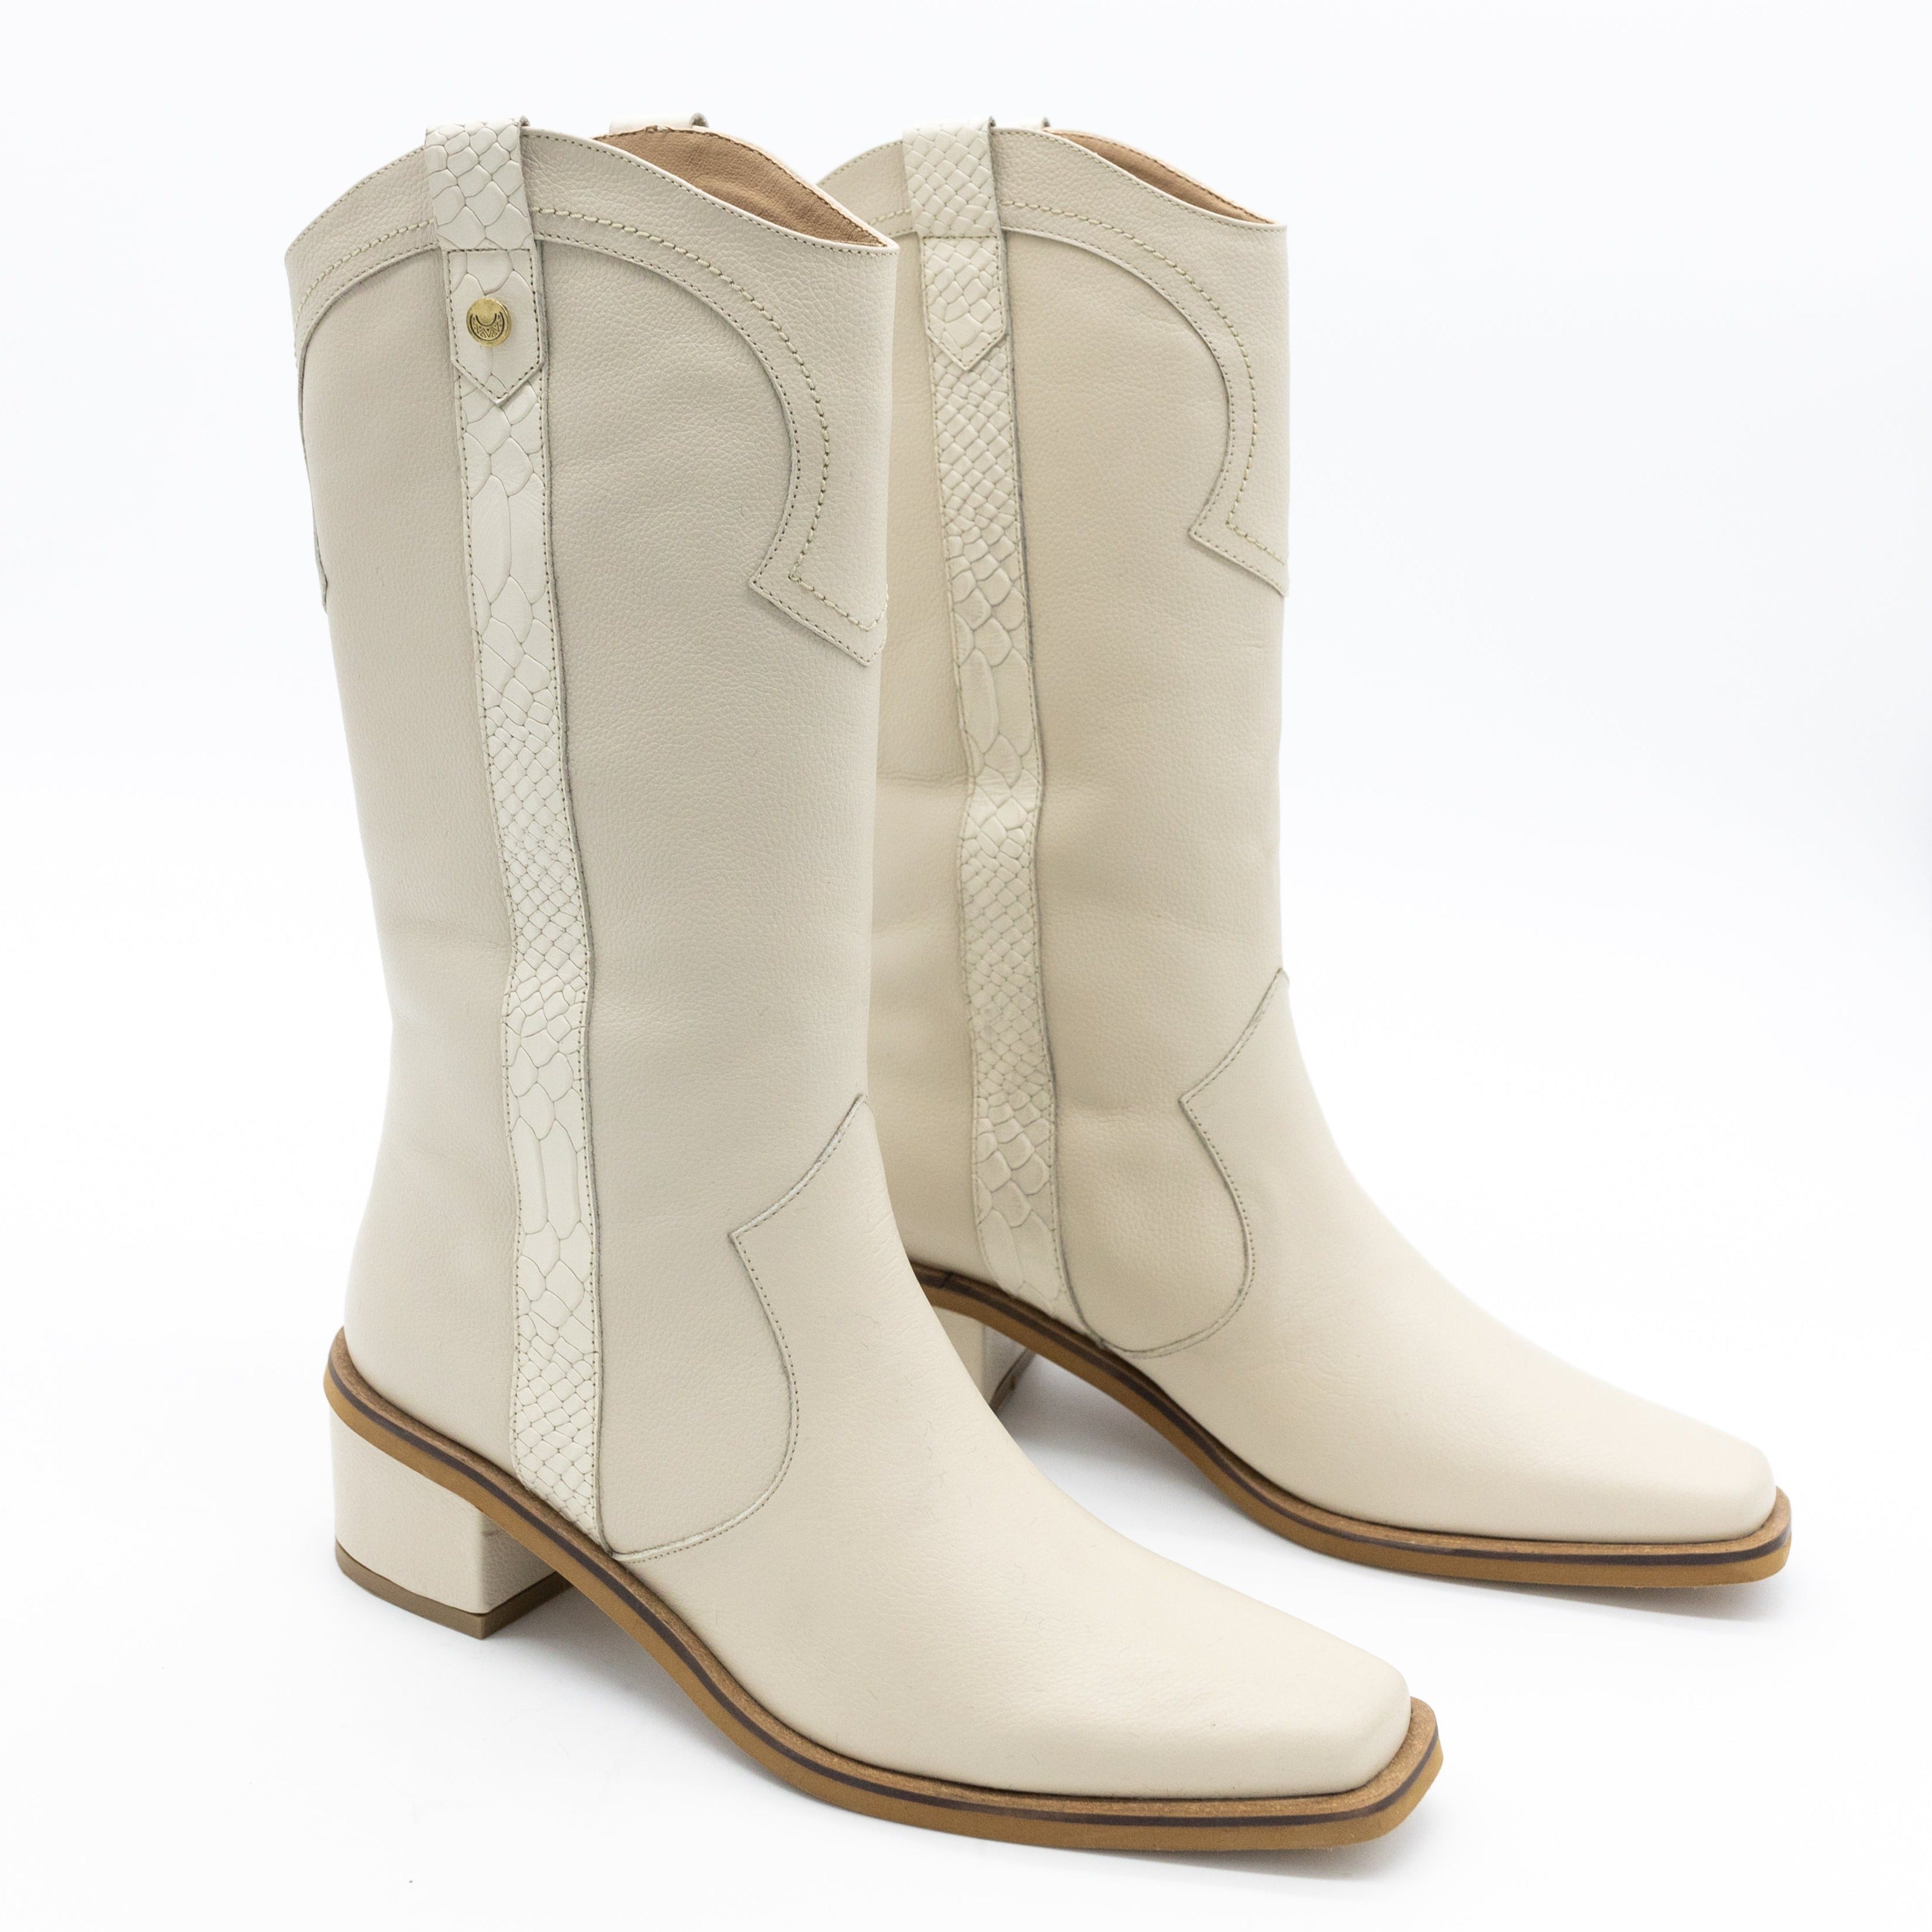 Western Inspired Boot, Ivory White Leather with Embossed Snakeskin. Stivali New York